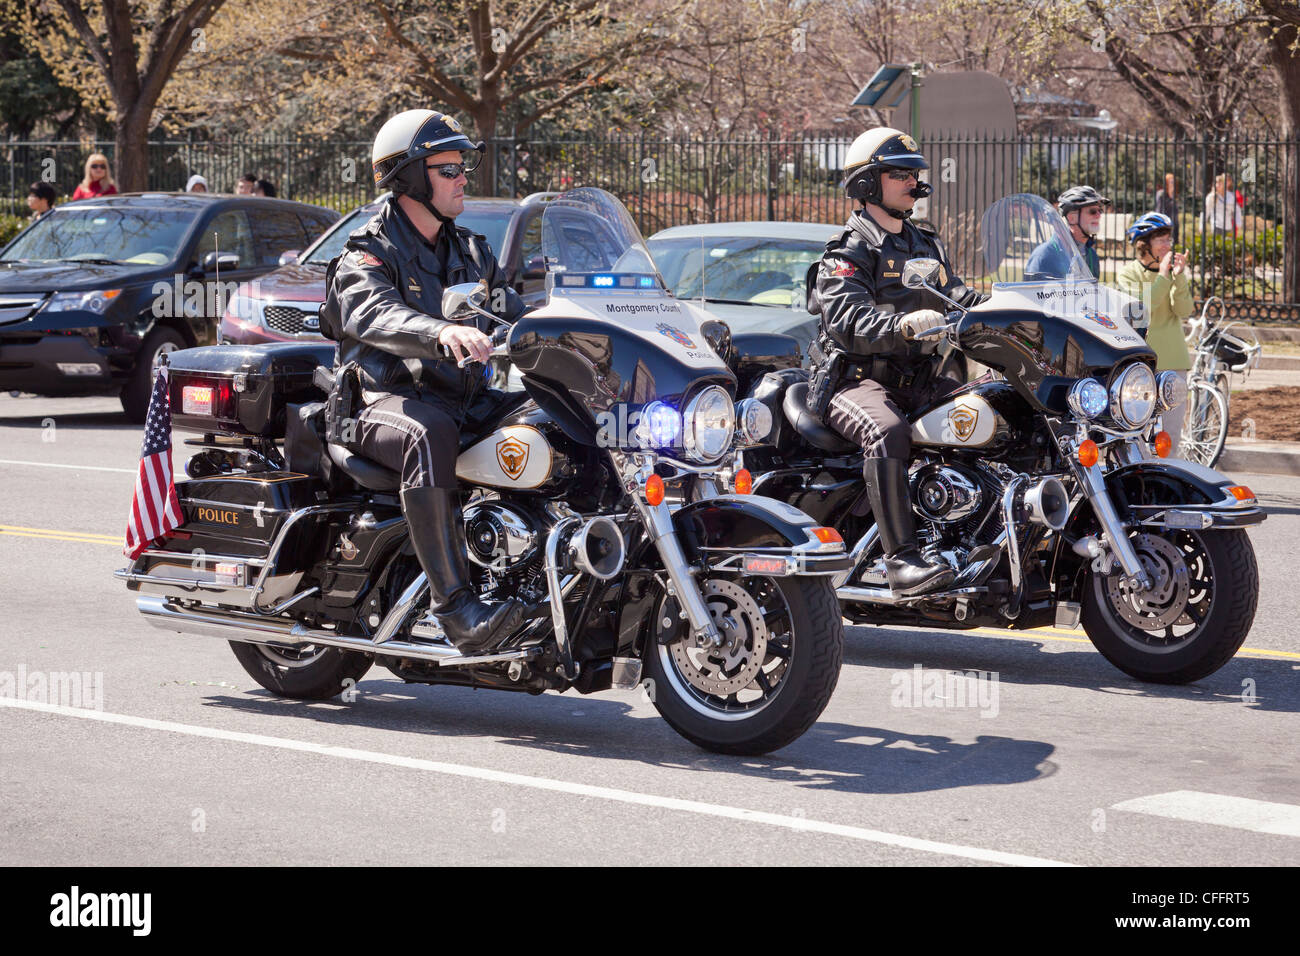 A pair of motorcycle police on road - Washington, DC USA Stock Photo